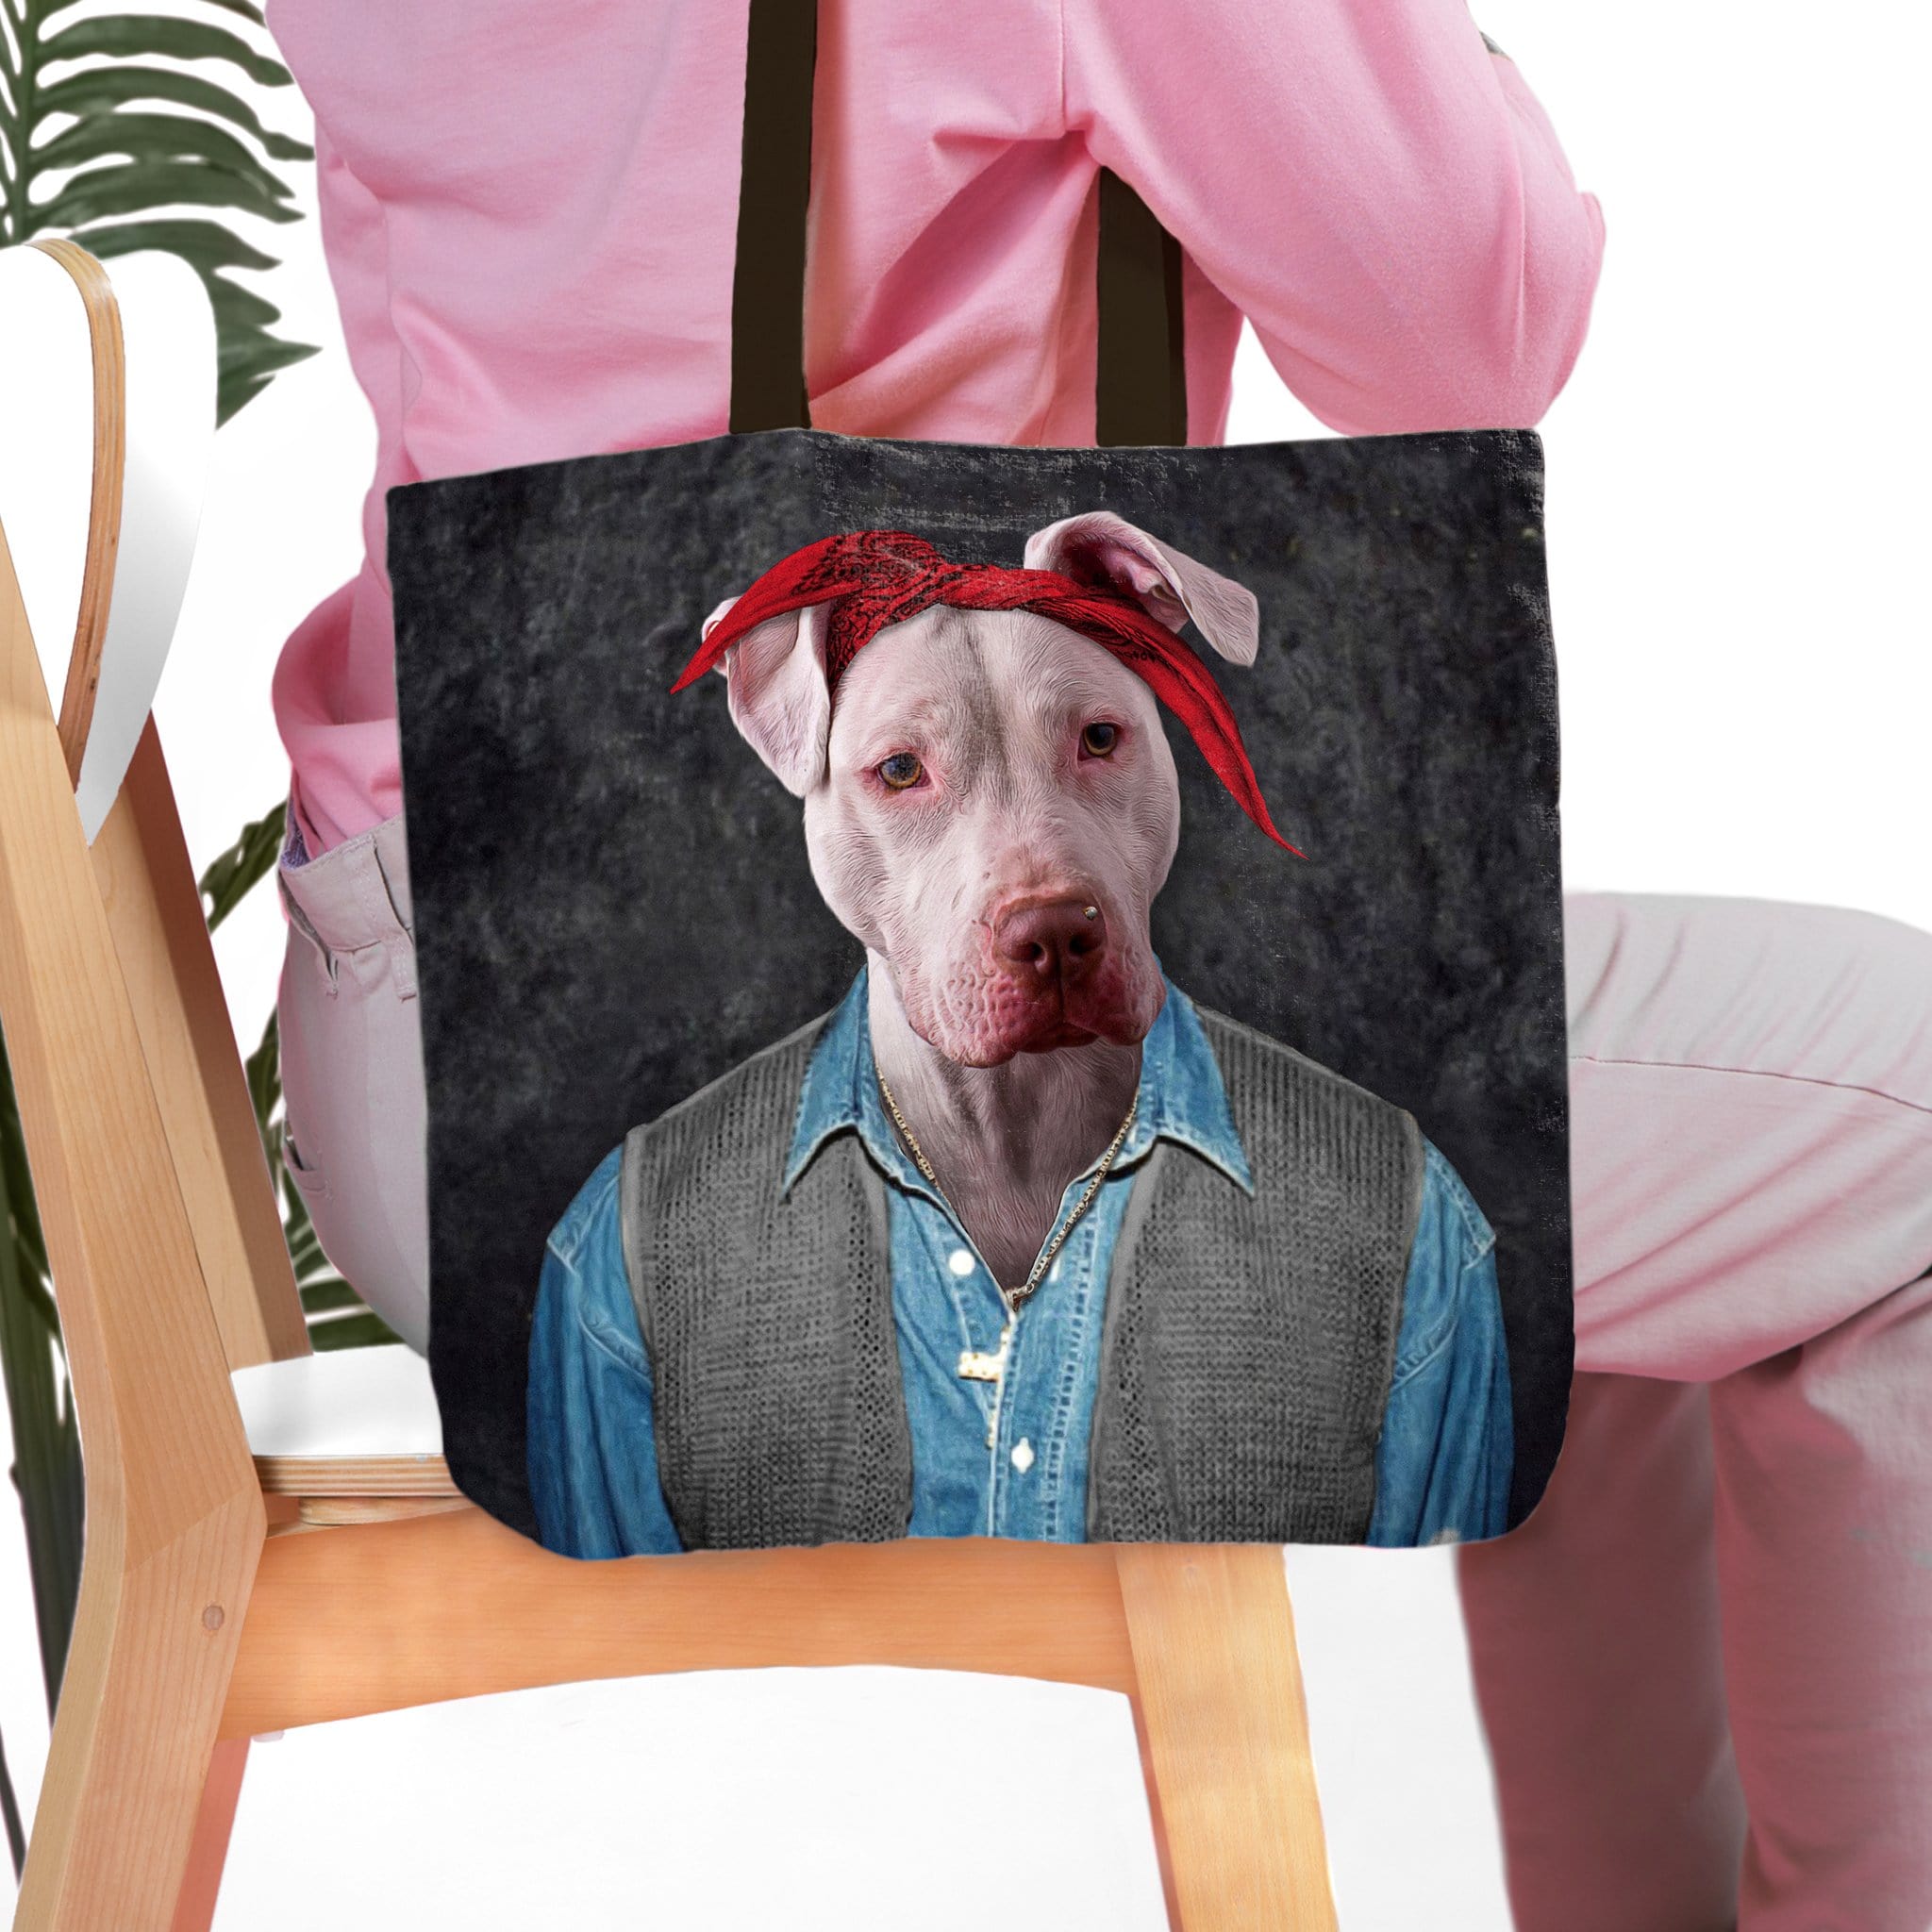 &#39;2pac Dogkur&#39; Personalized Tote Bag